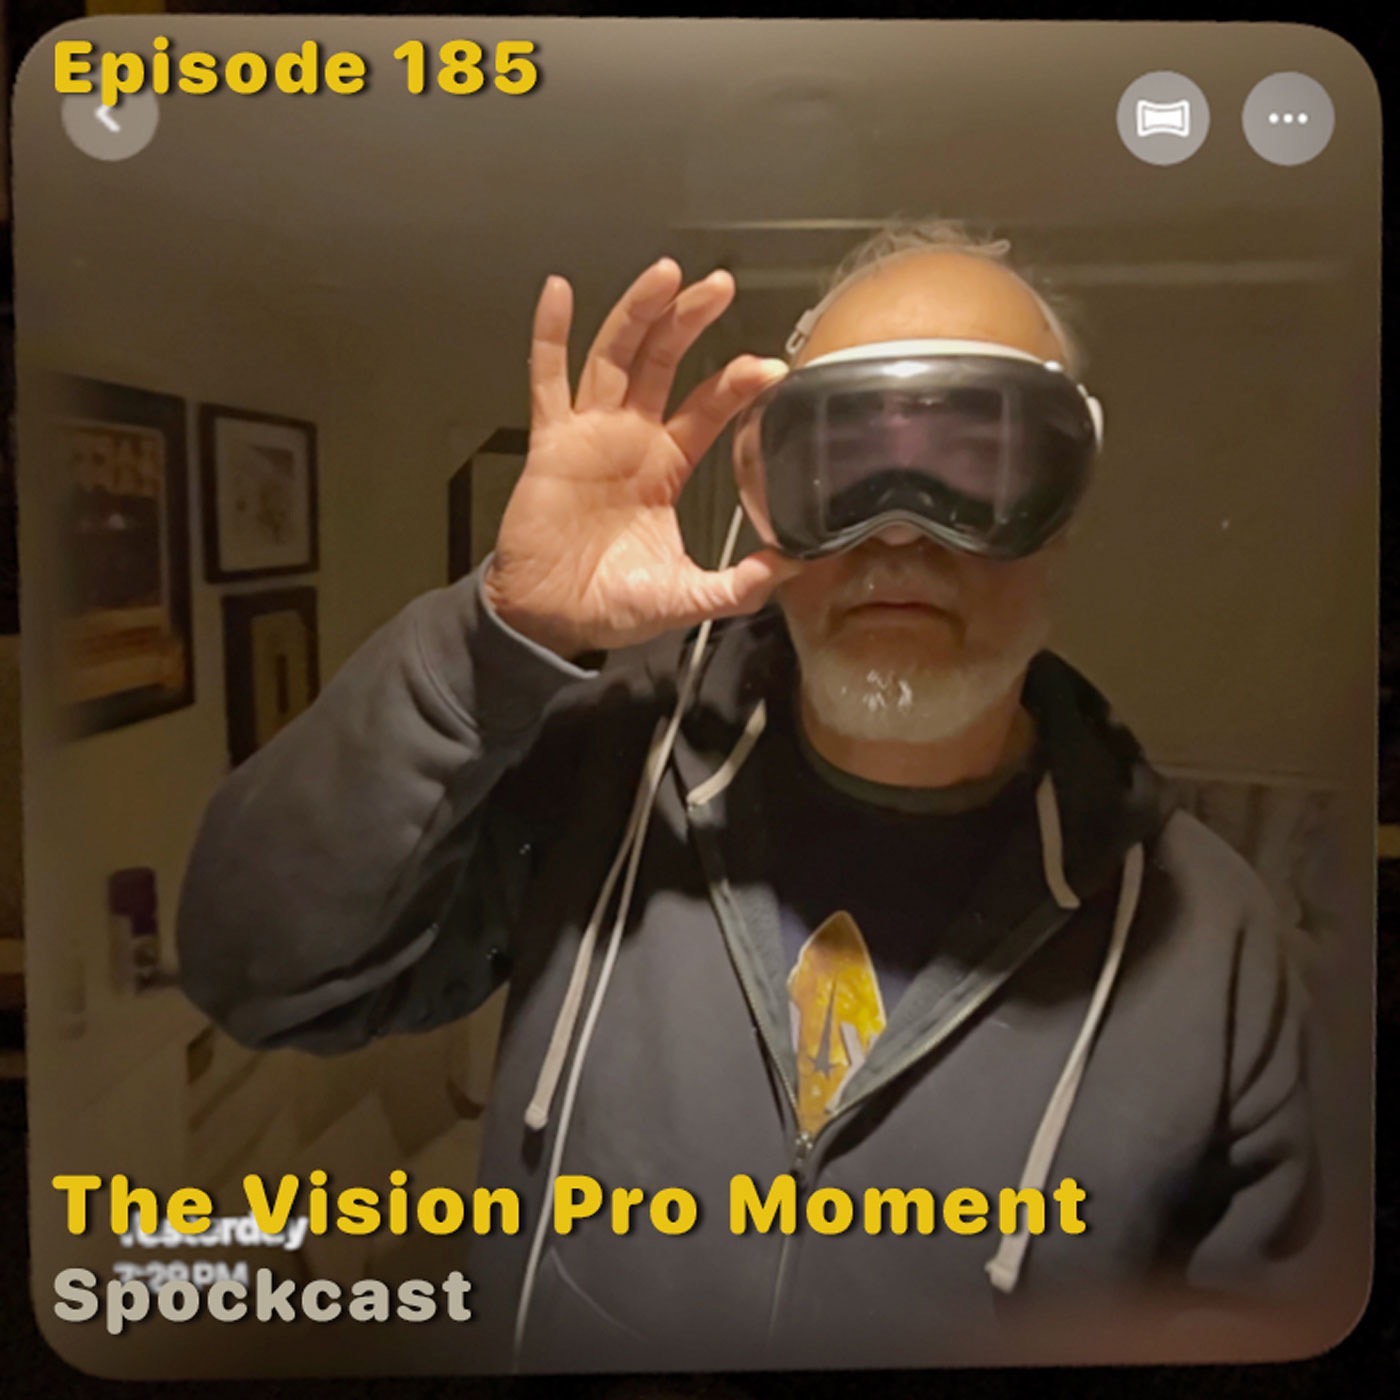 The Vision Pro Moment